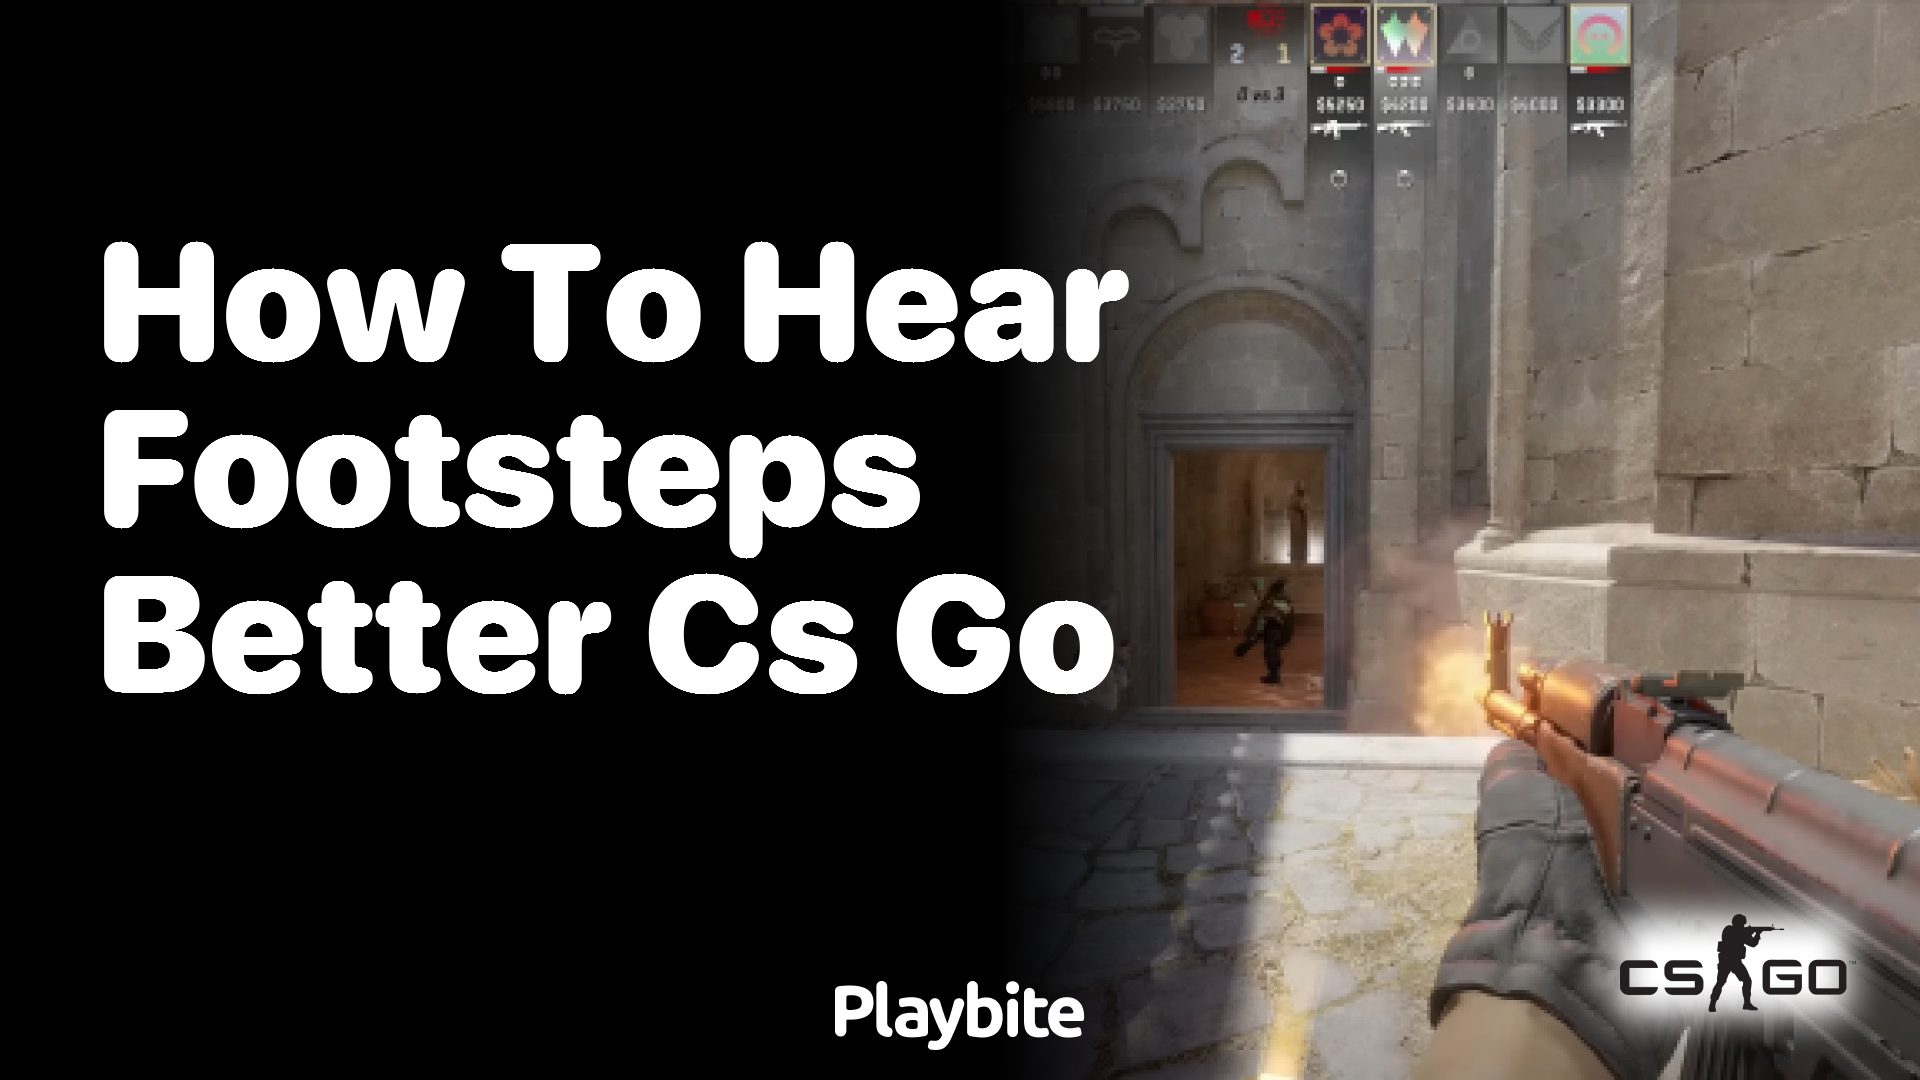 How to hear footsteps better in CS:GO